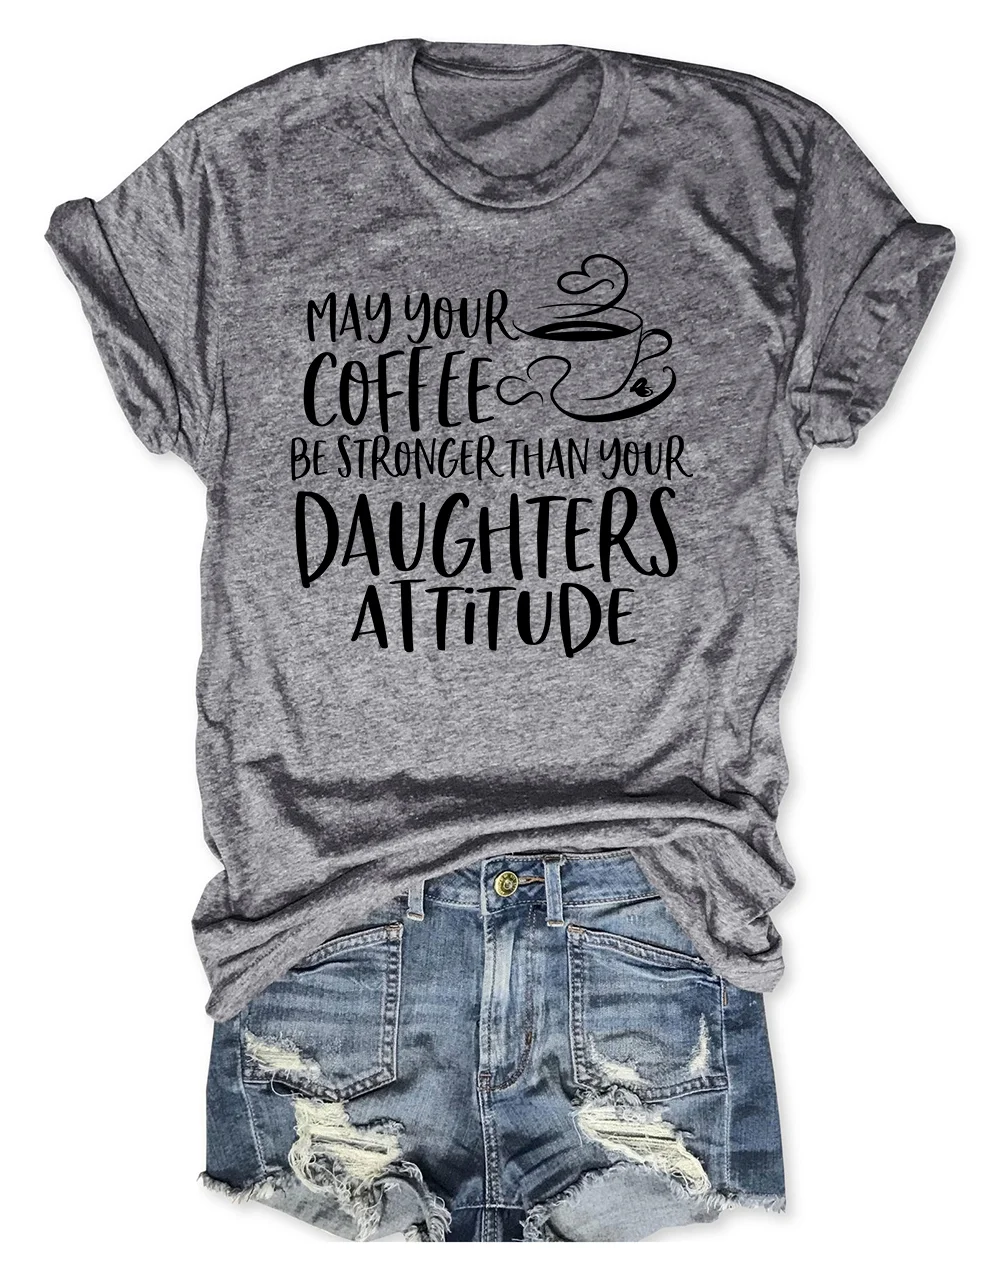 May Your Coffee Be Stronger Than Your Daughter's Attitude T-Shirt